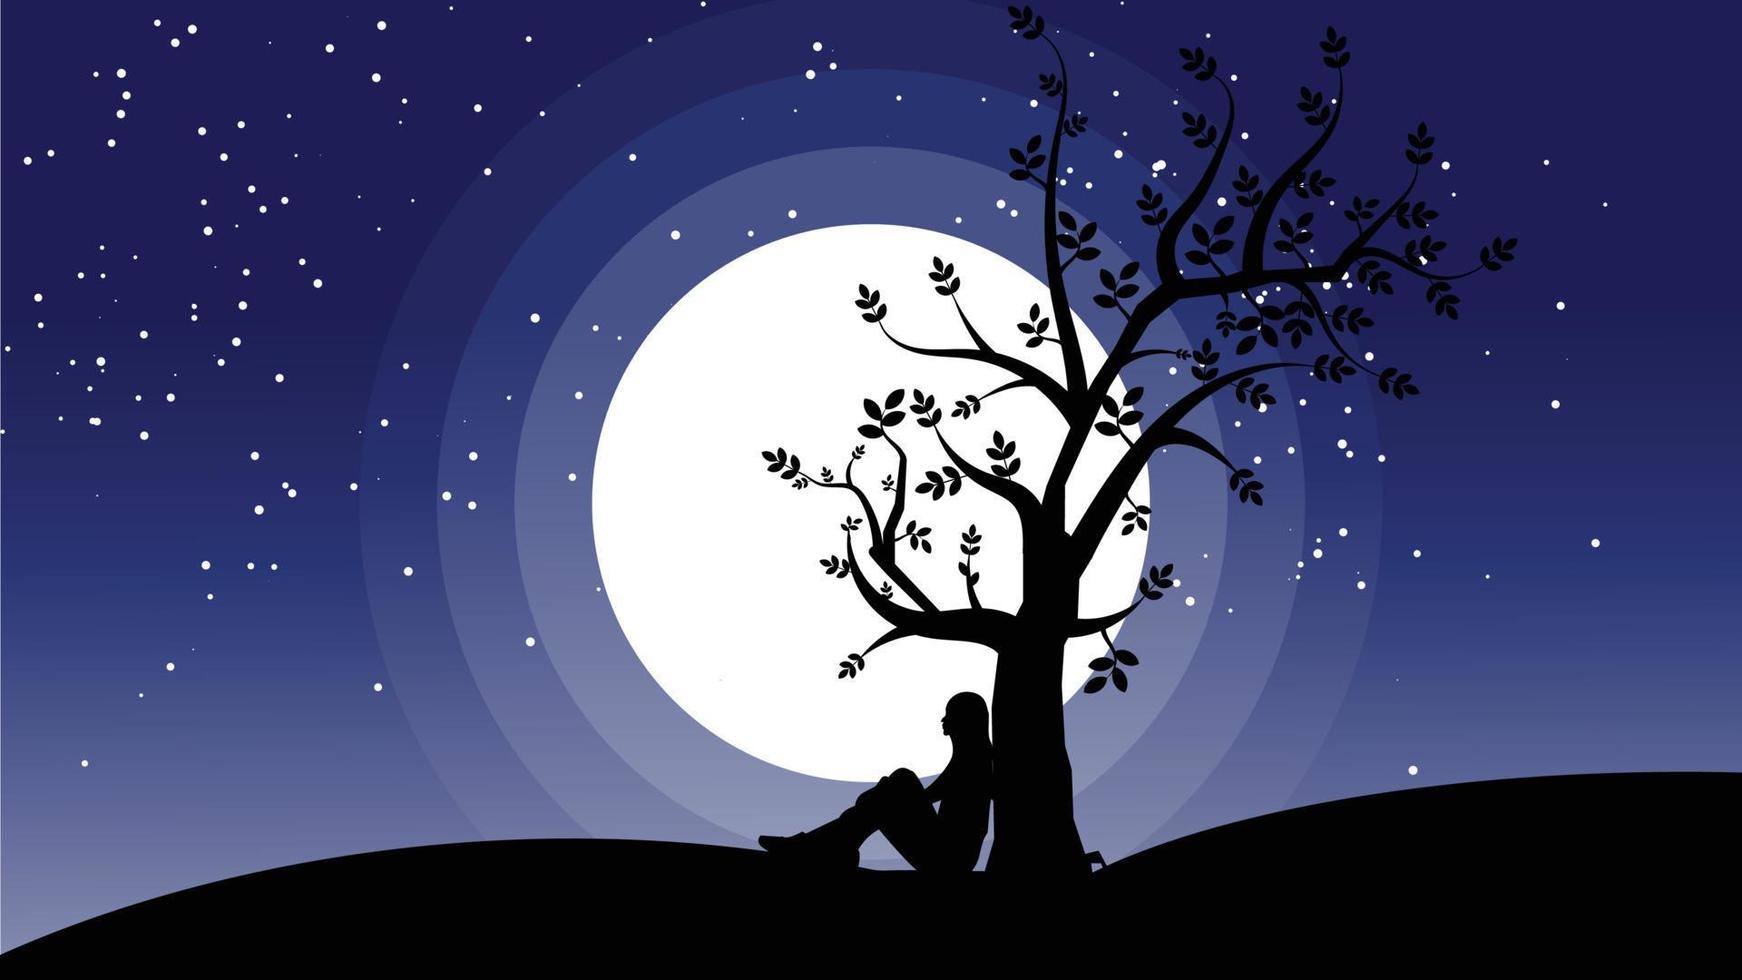 lonely background at night vector